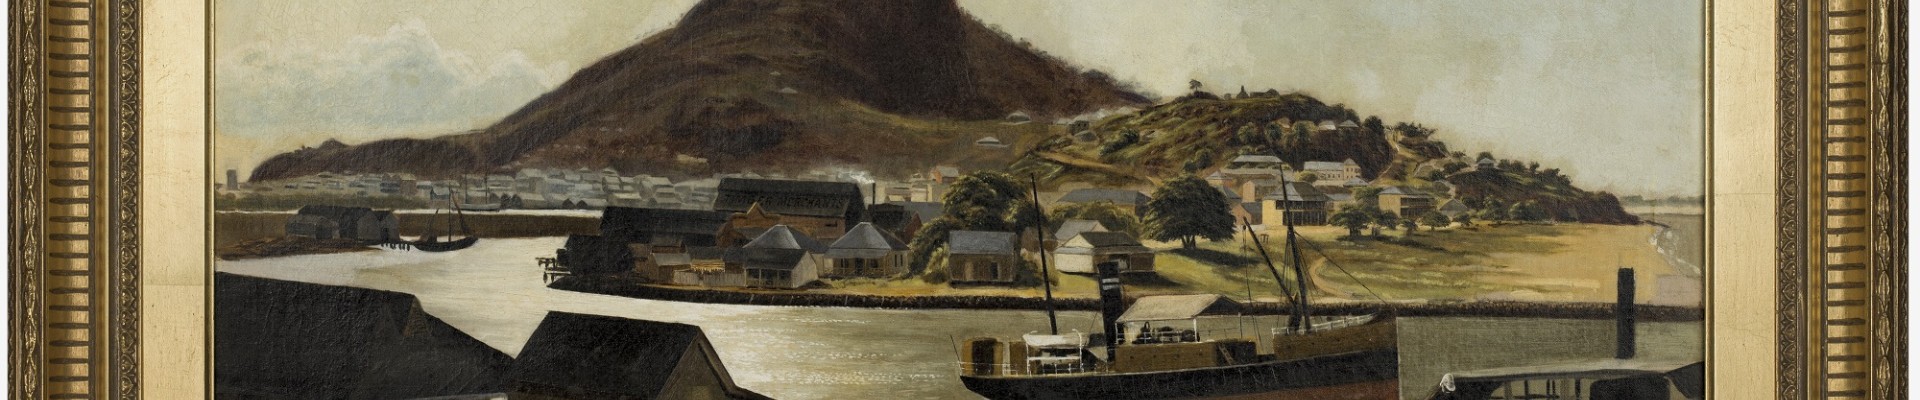 Edward Bevan Castle Hill Townsville painting 1886